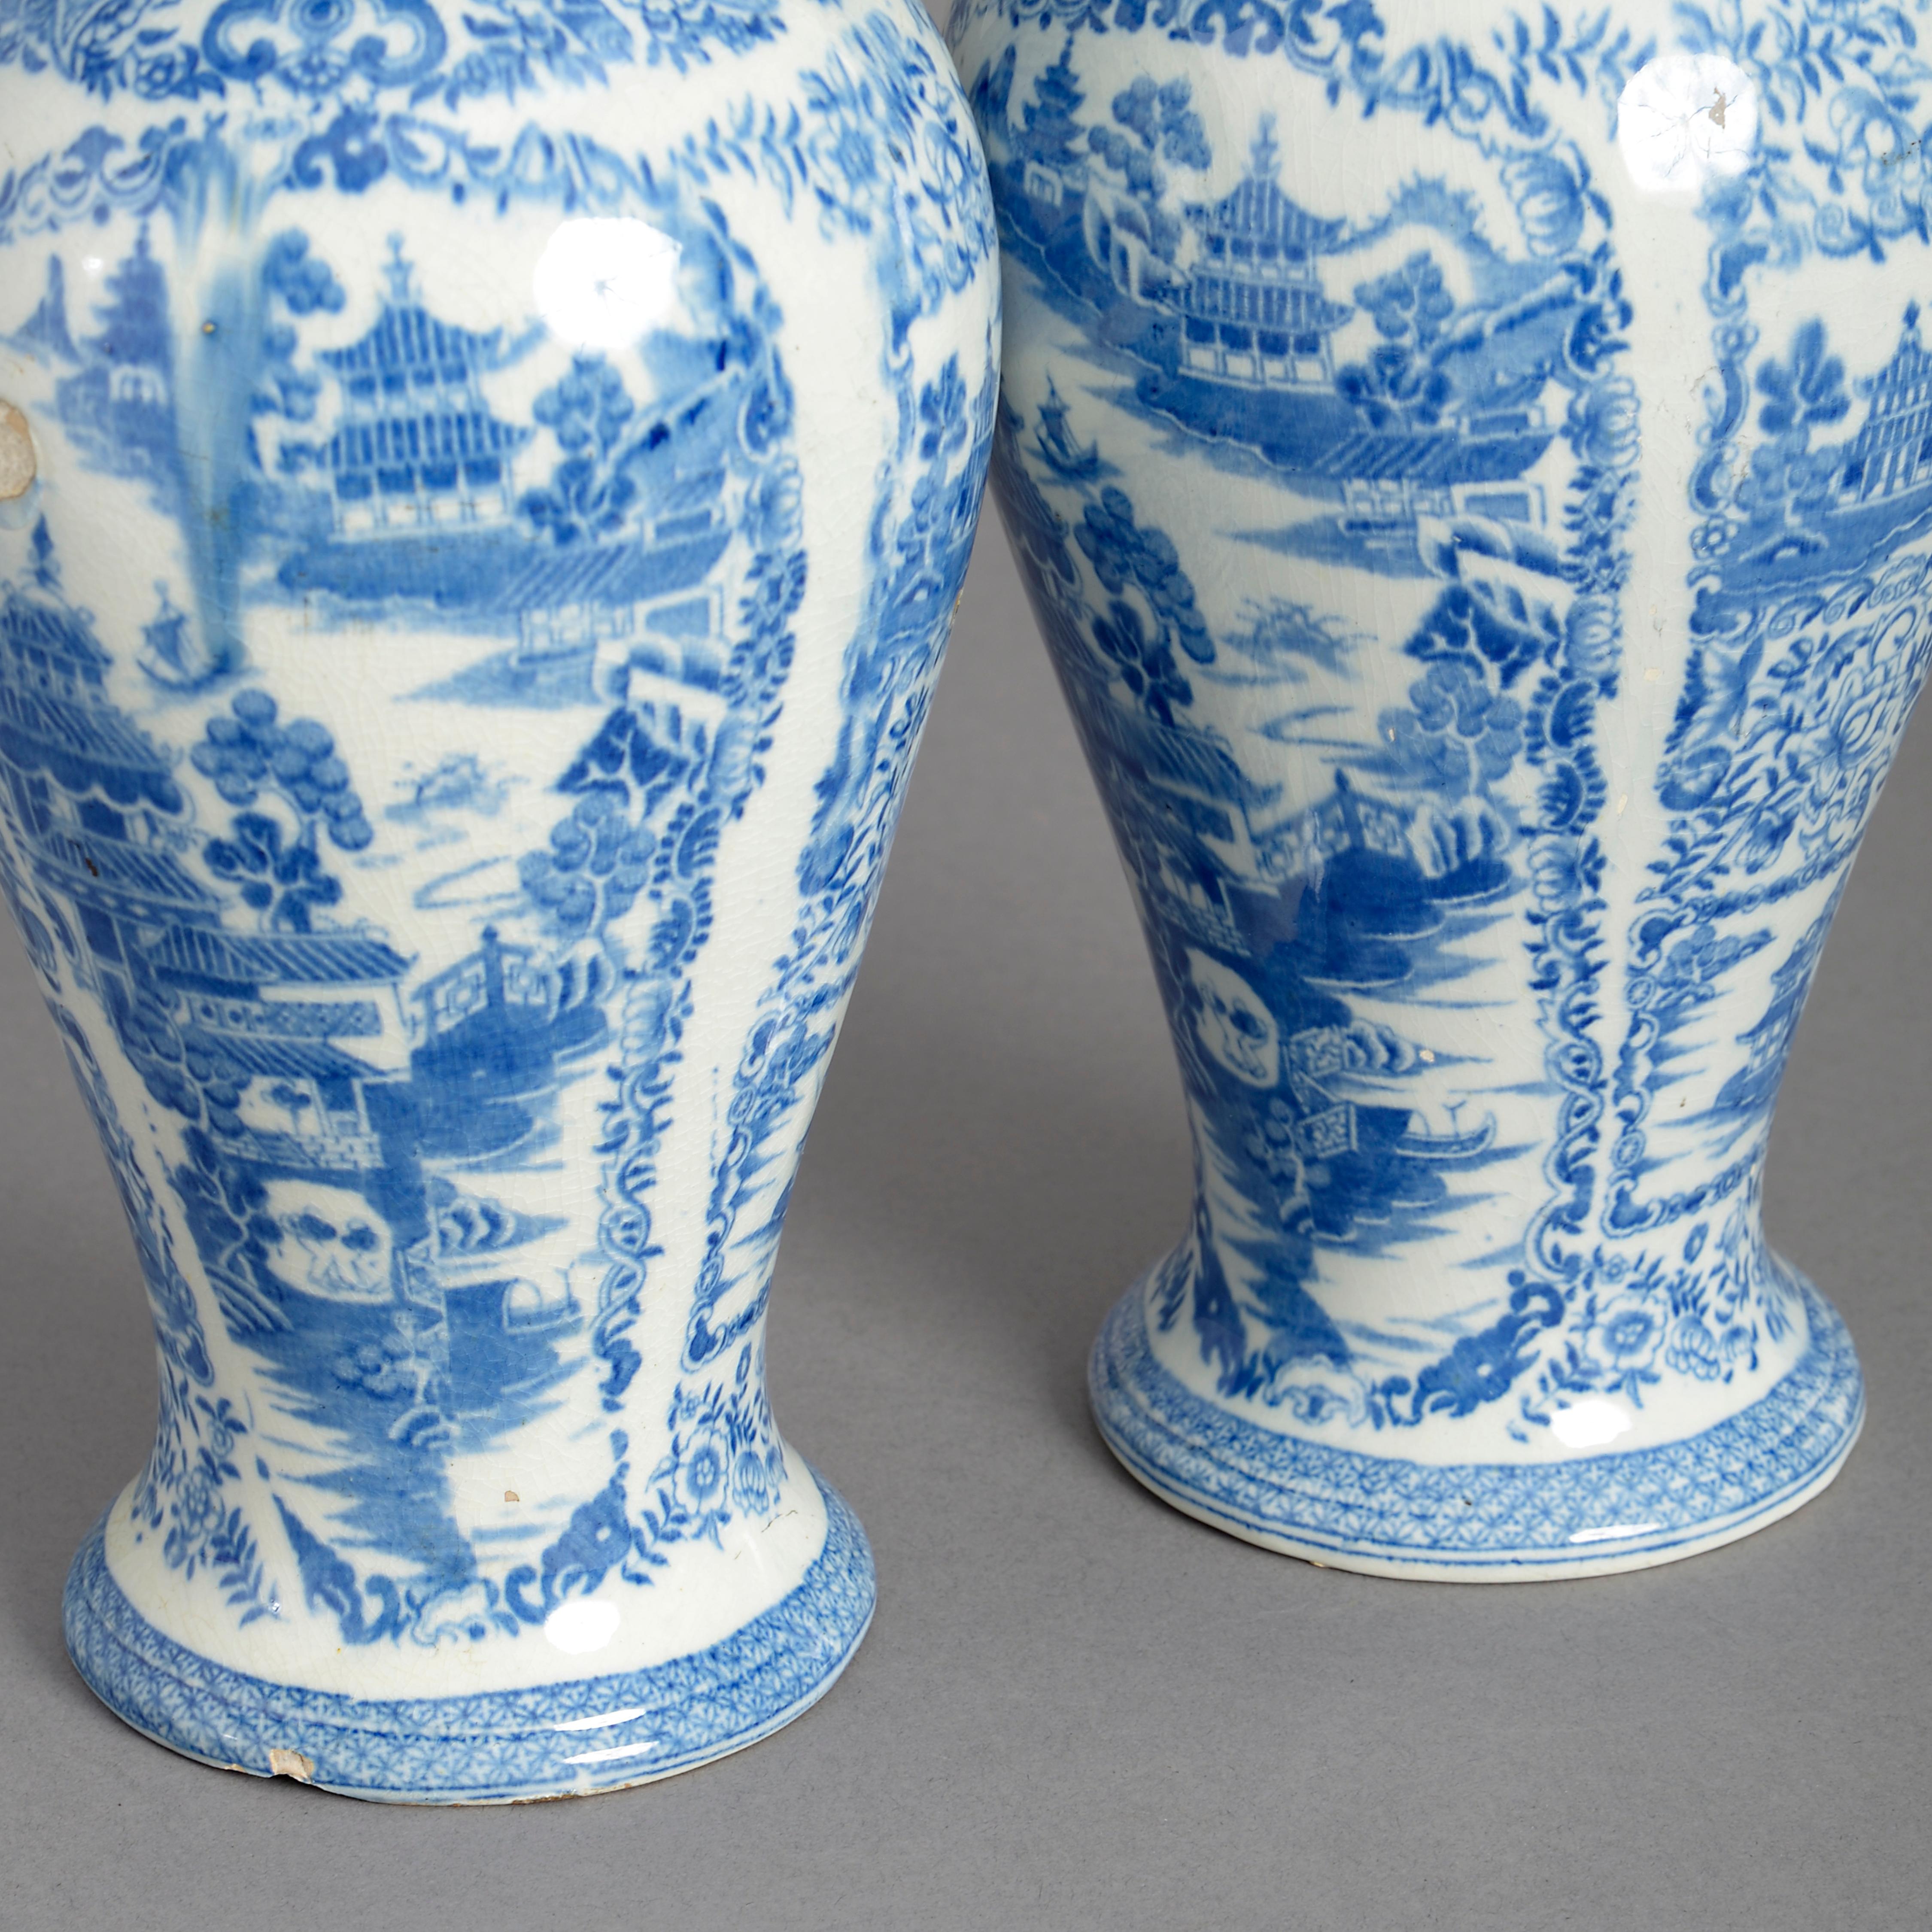 A pair of late 18th century blue and white glazed Staffordshire pottery baluster vases and covers, decorated throughout with chinoiserie.

One neck restored. One vase with period firing mistakes to the body.